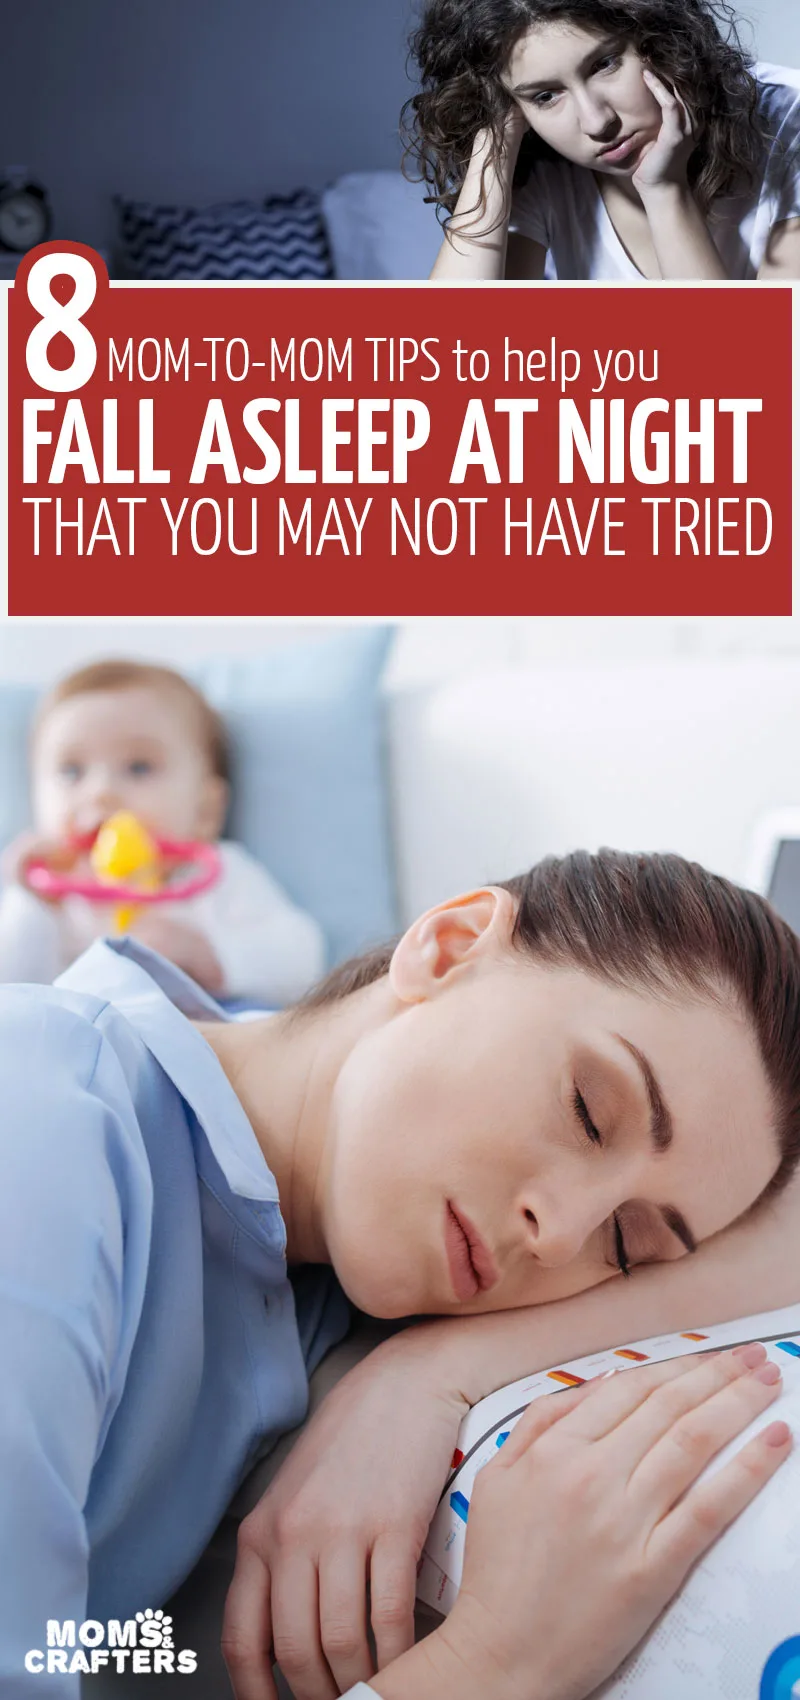 Click for 8 mom insomnia tips for falling asleep at night quickly! These parenting tips are super helpful and important self care for moms